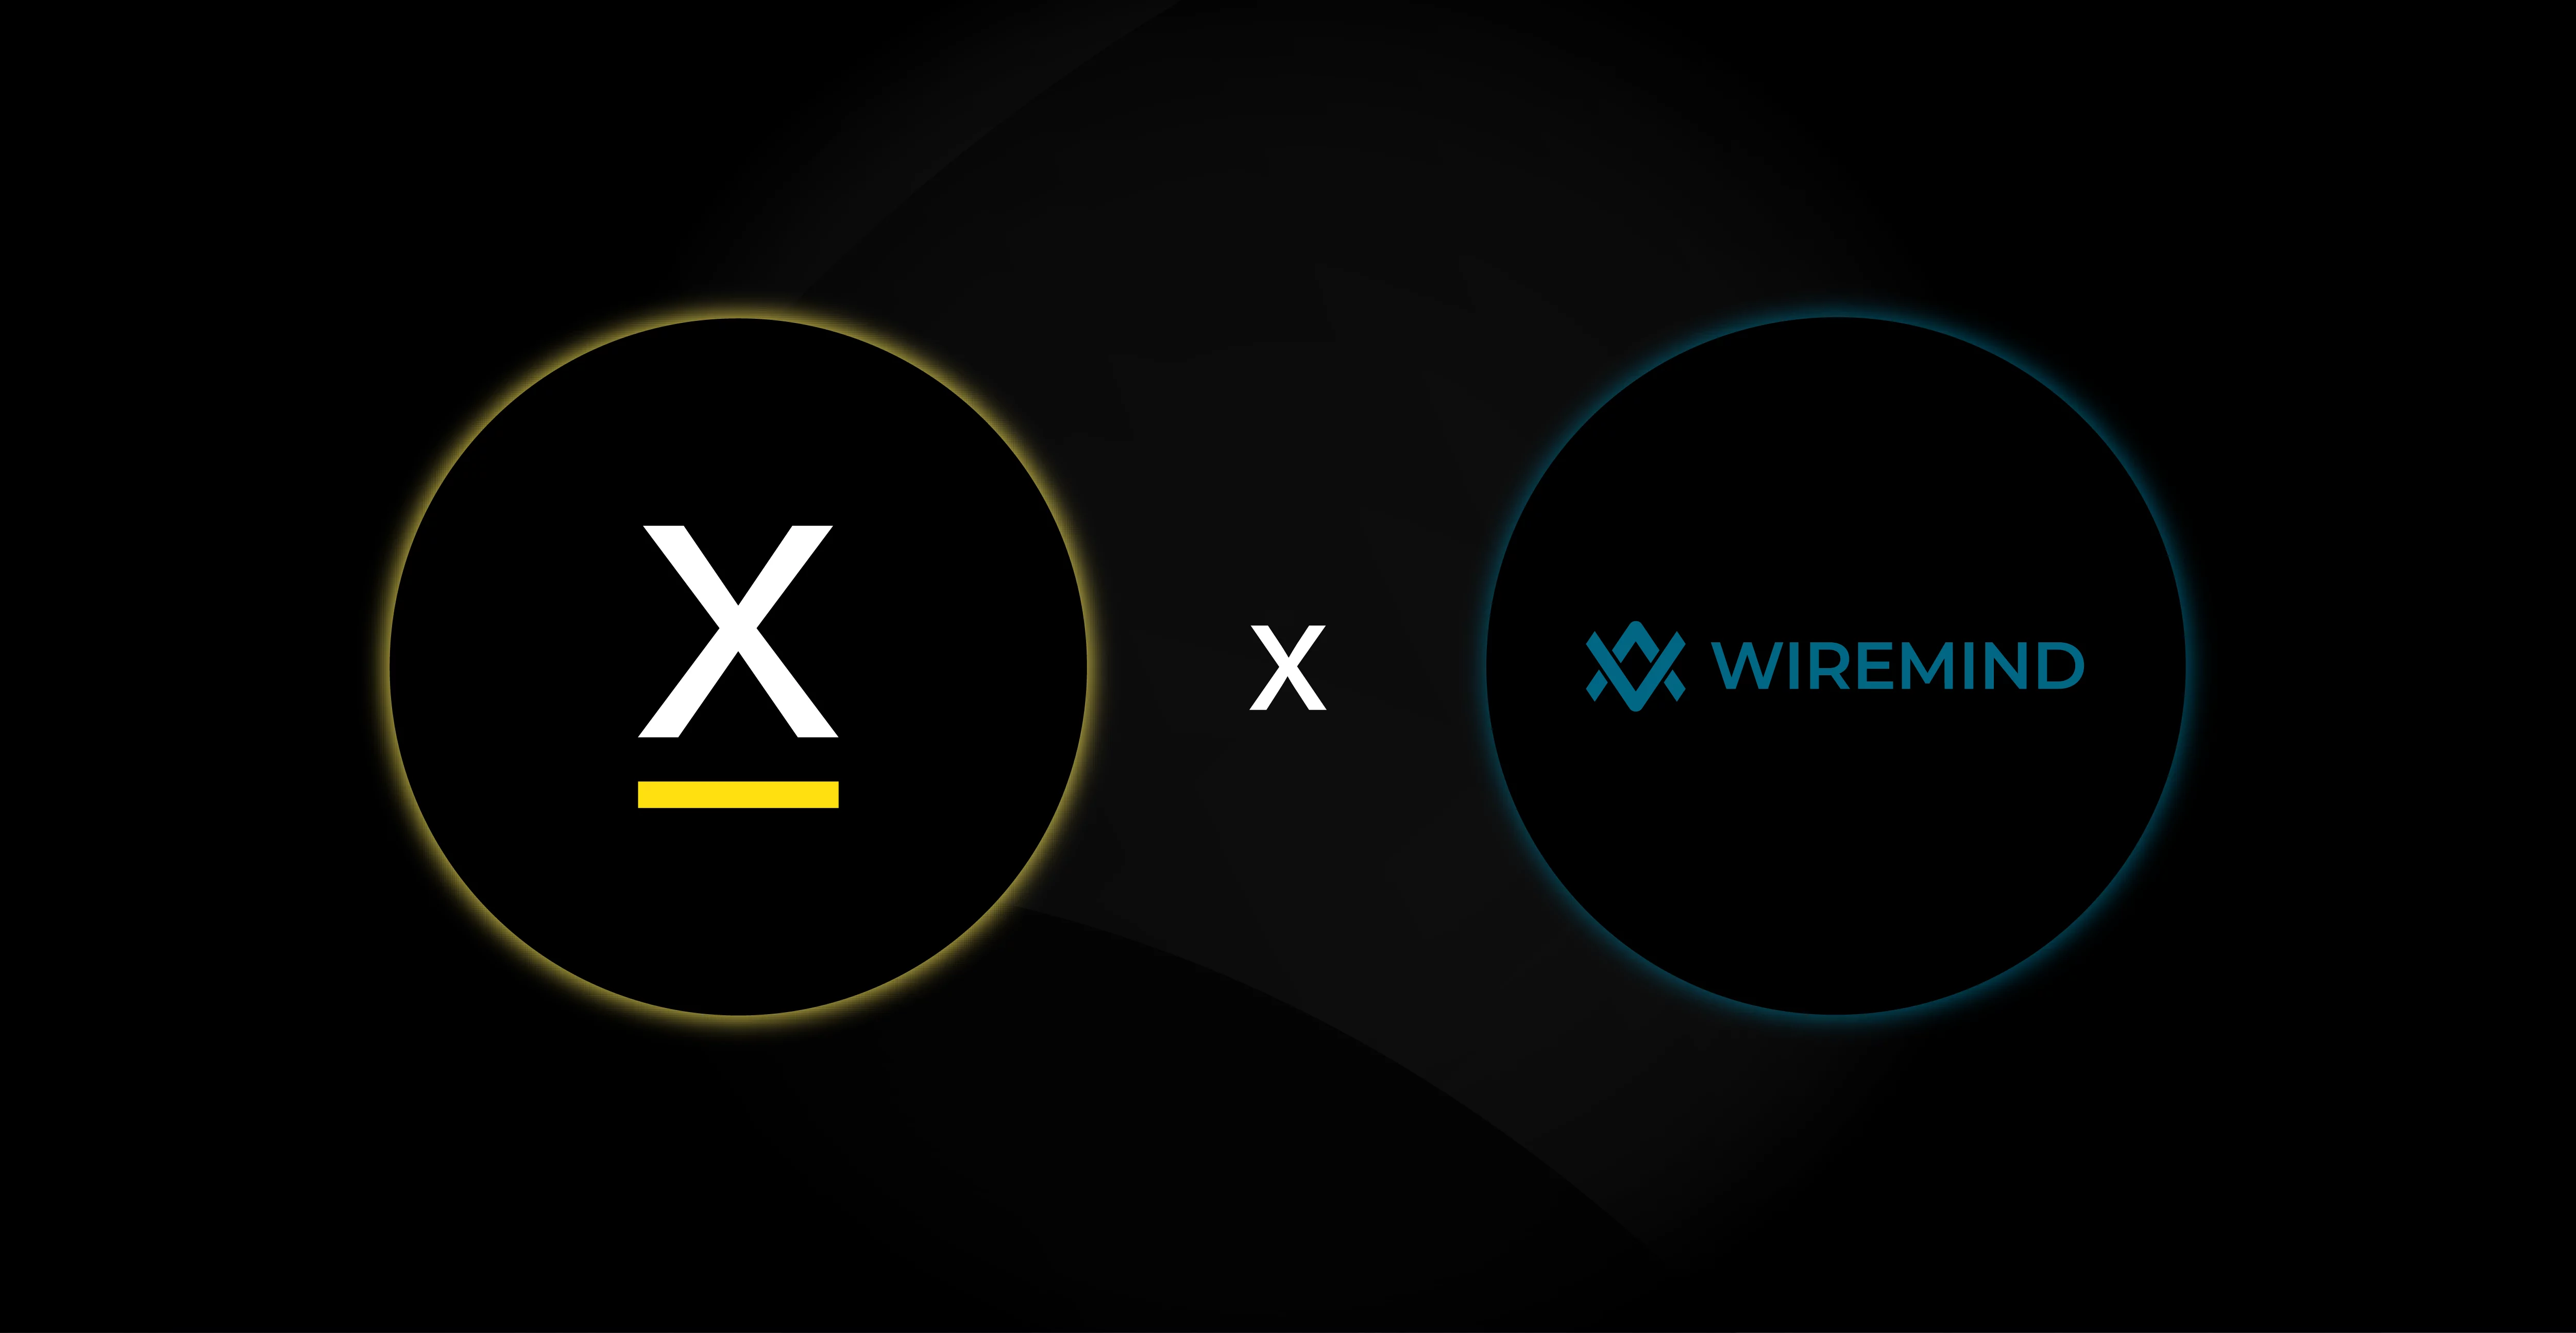 Proxidize and WireMind logos